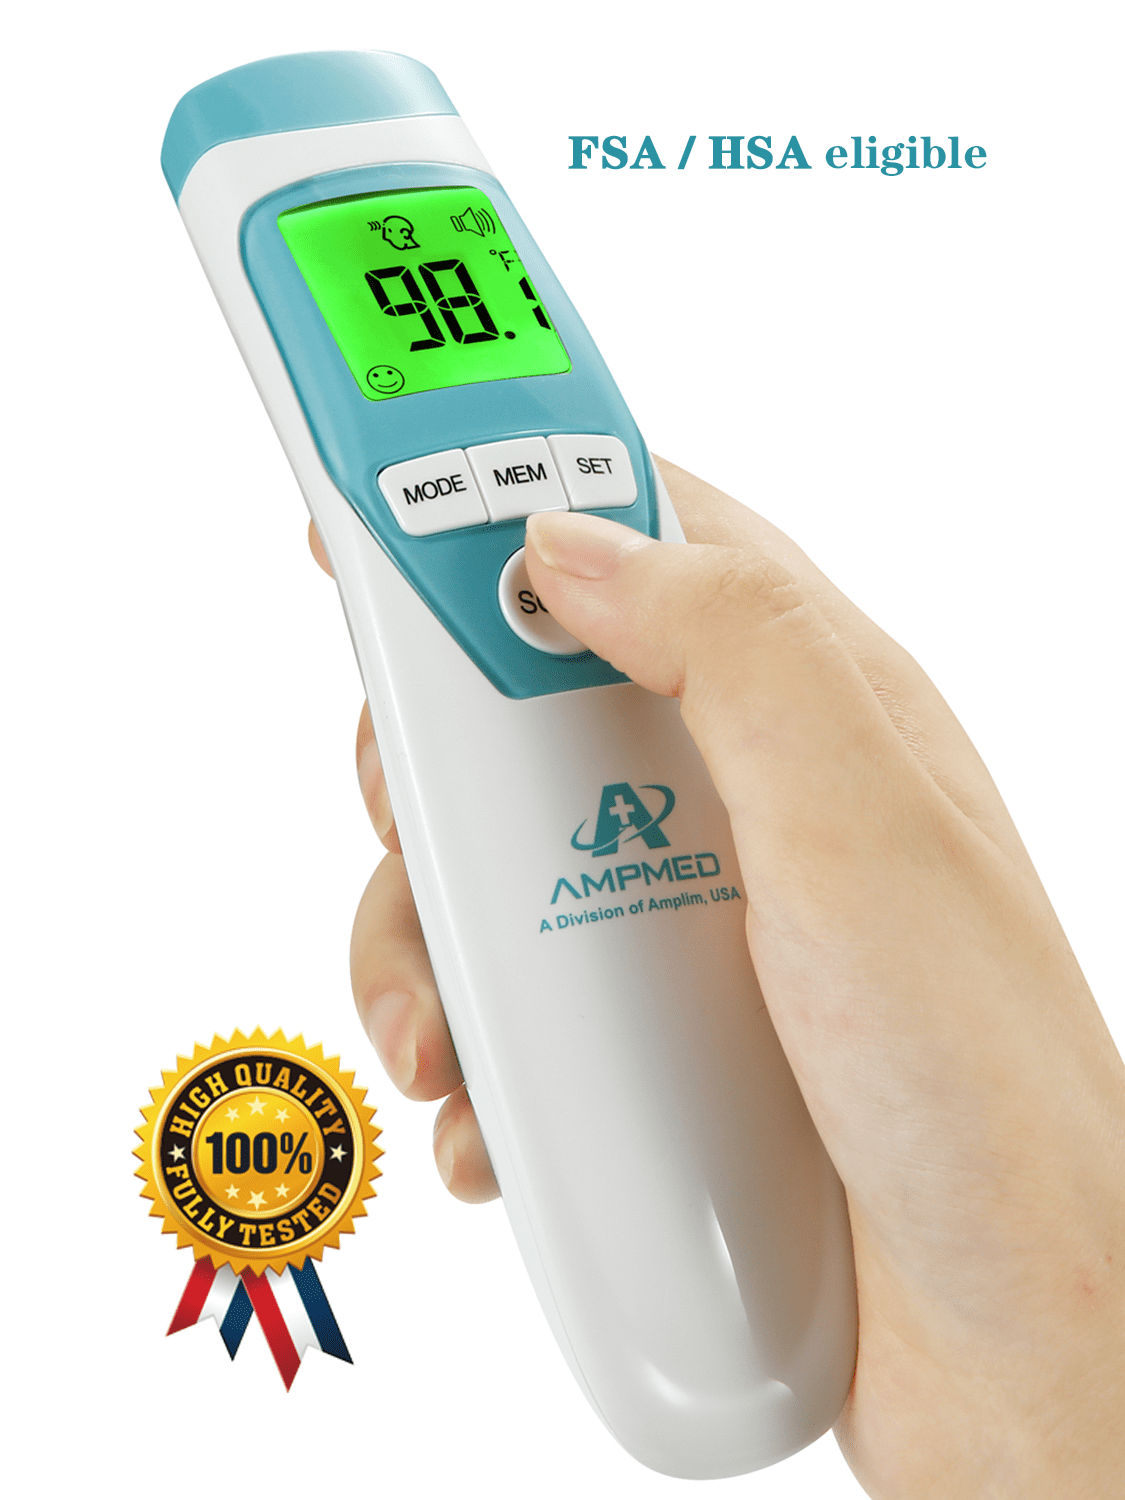 Infrared thermometer - A. V. Hospital